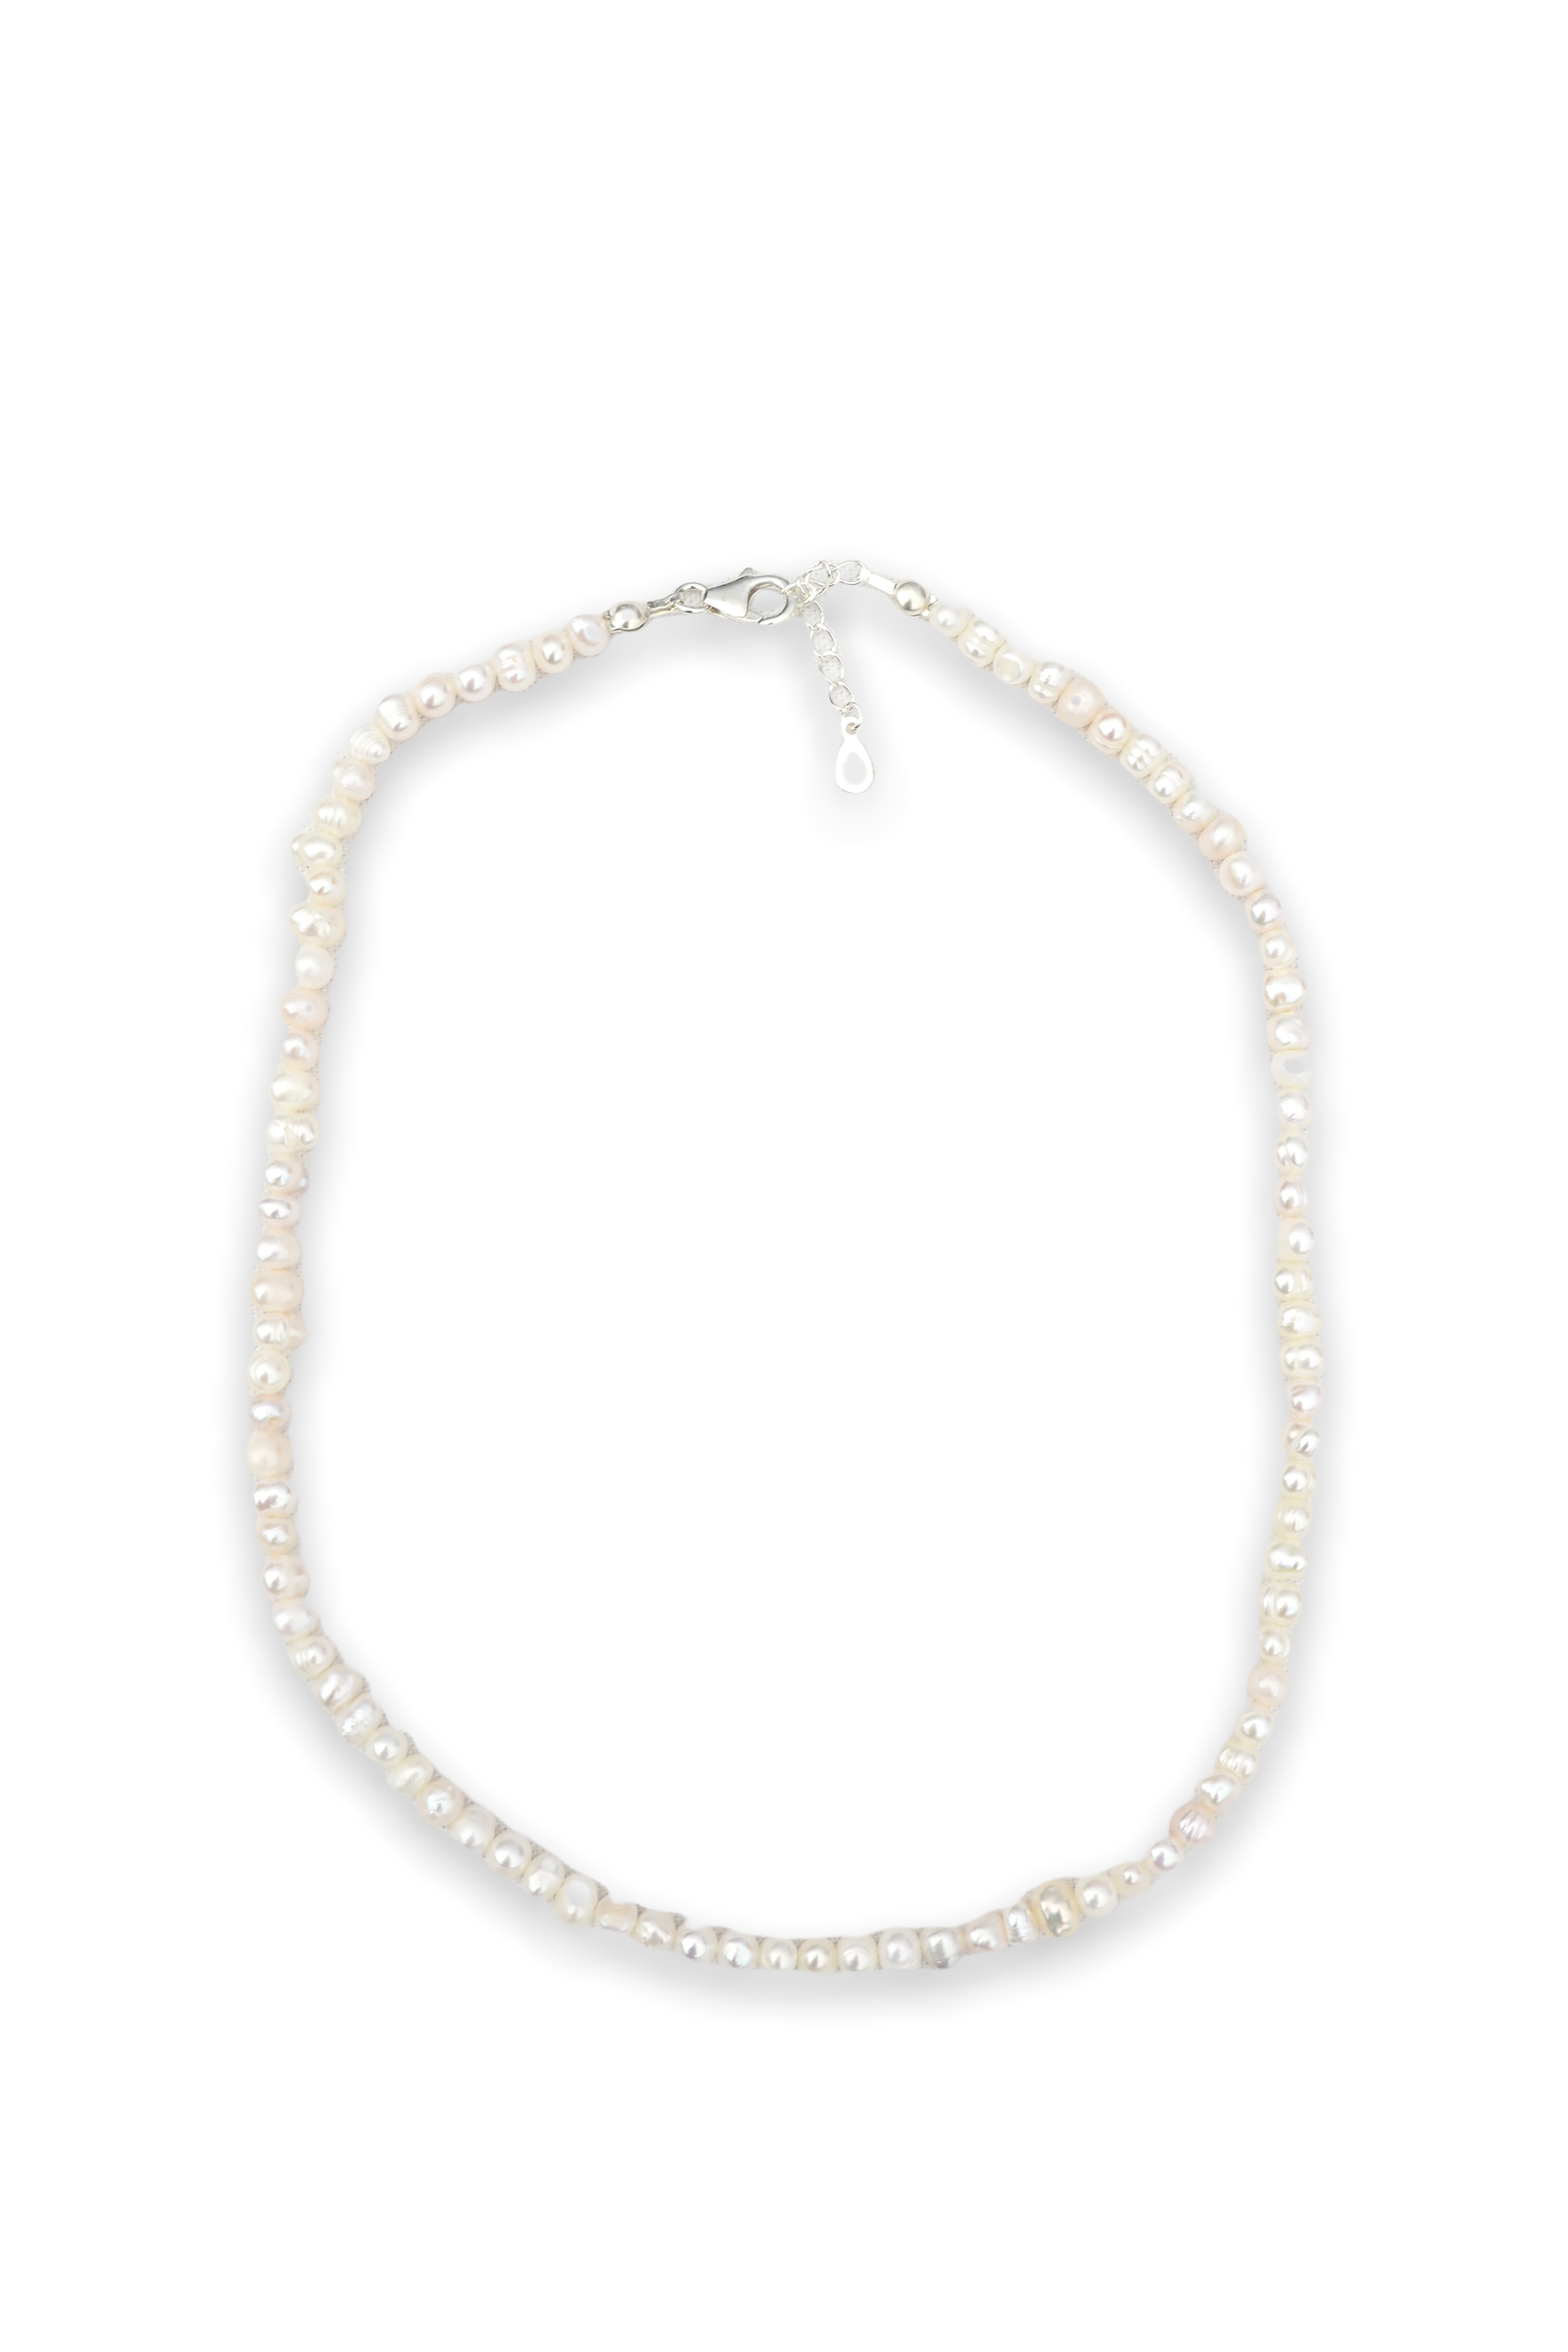 Freshwater pearl and sterling silver necklace – Alice Rose Jewellery